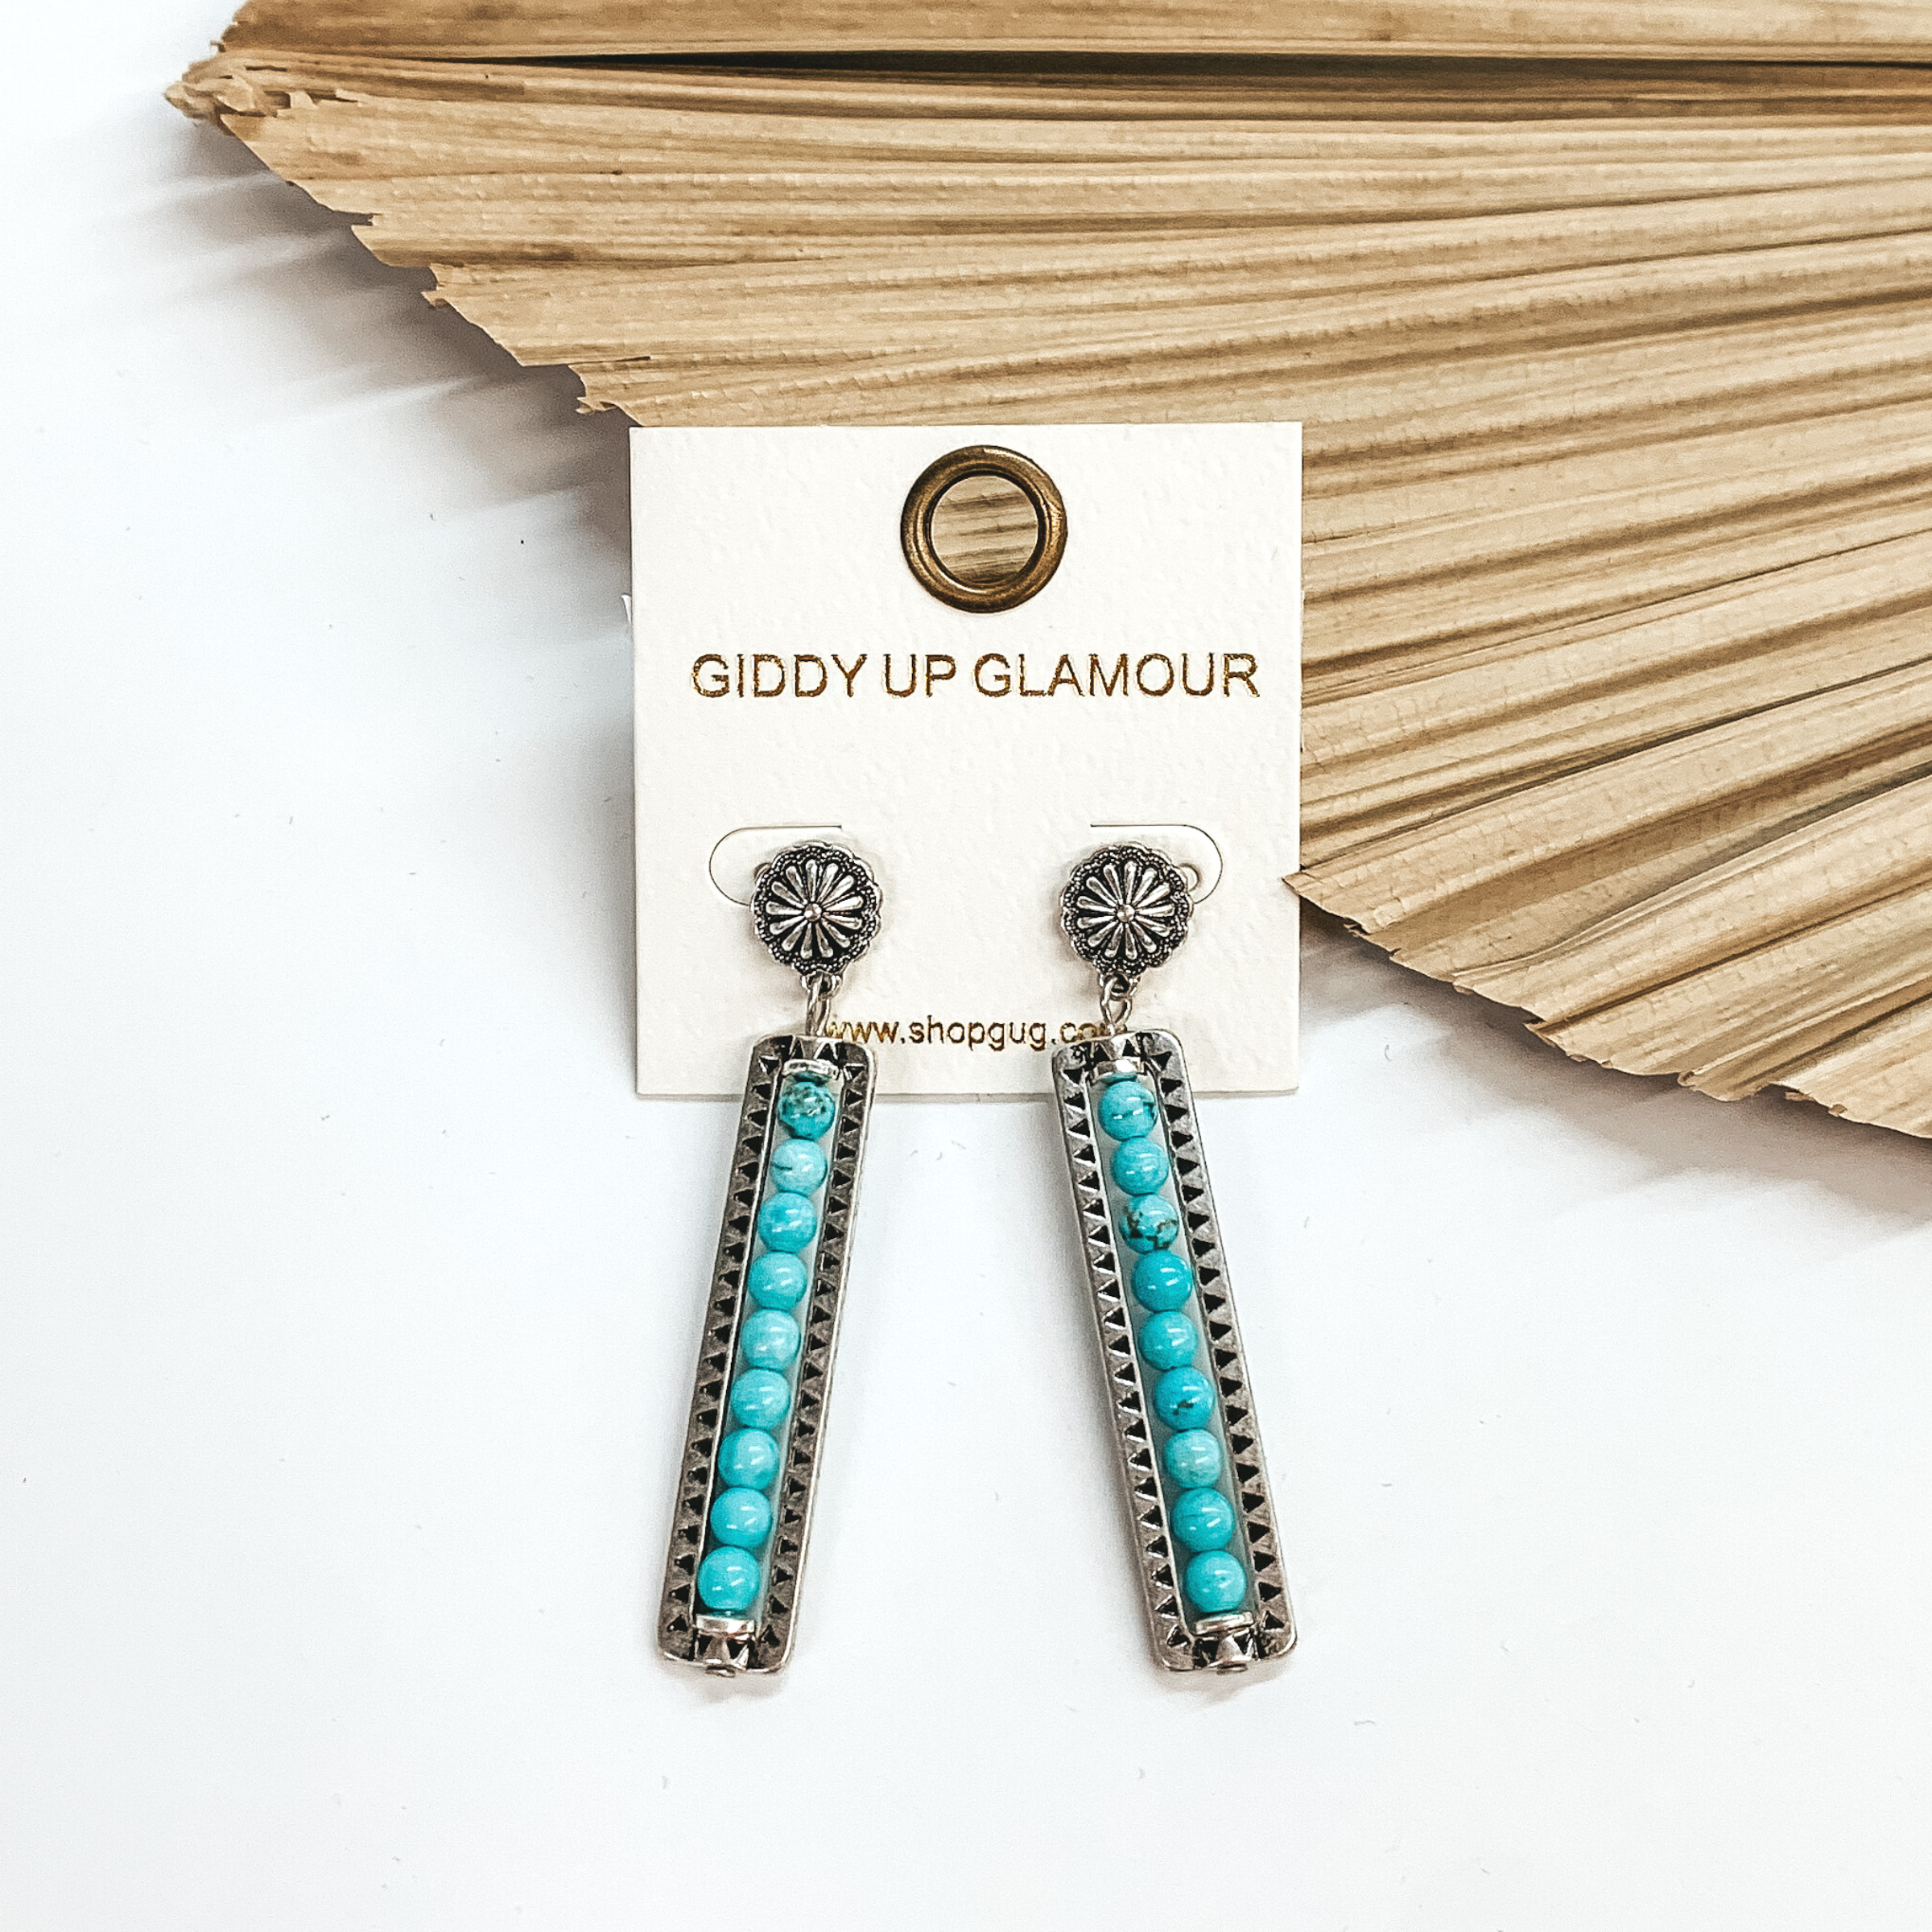 Silver small concho post earrings with a rectangle bar drop with  stone beads in turquoise and black detailing.  These earrings are taken leaning up  against a dried up palm leaf and a white background.